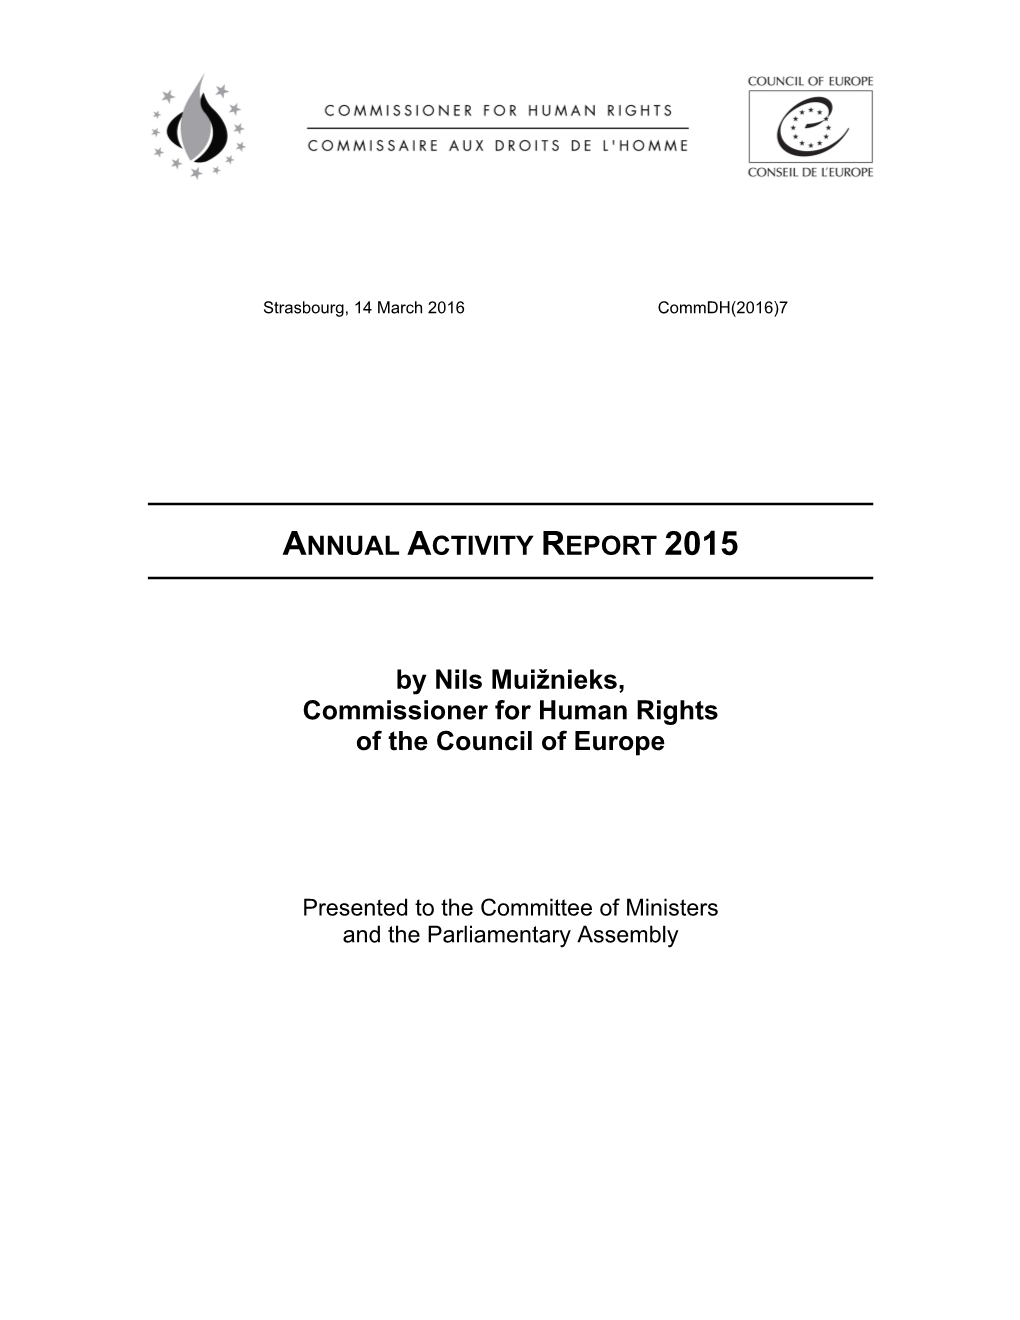 ANNUAL ACTIVITY REPORT 2015 by Nils Muižnieks, Commissioner For